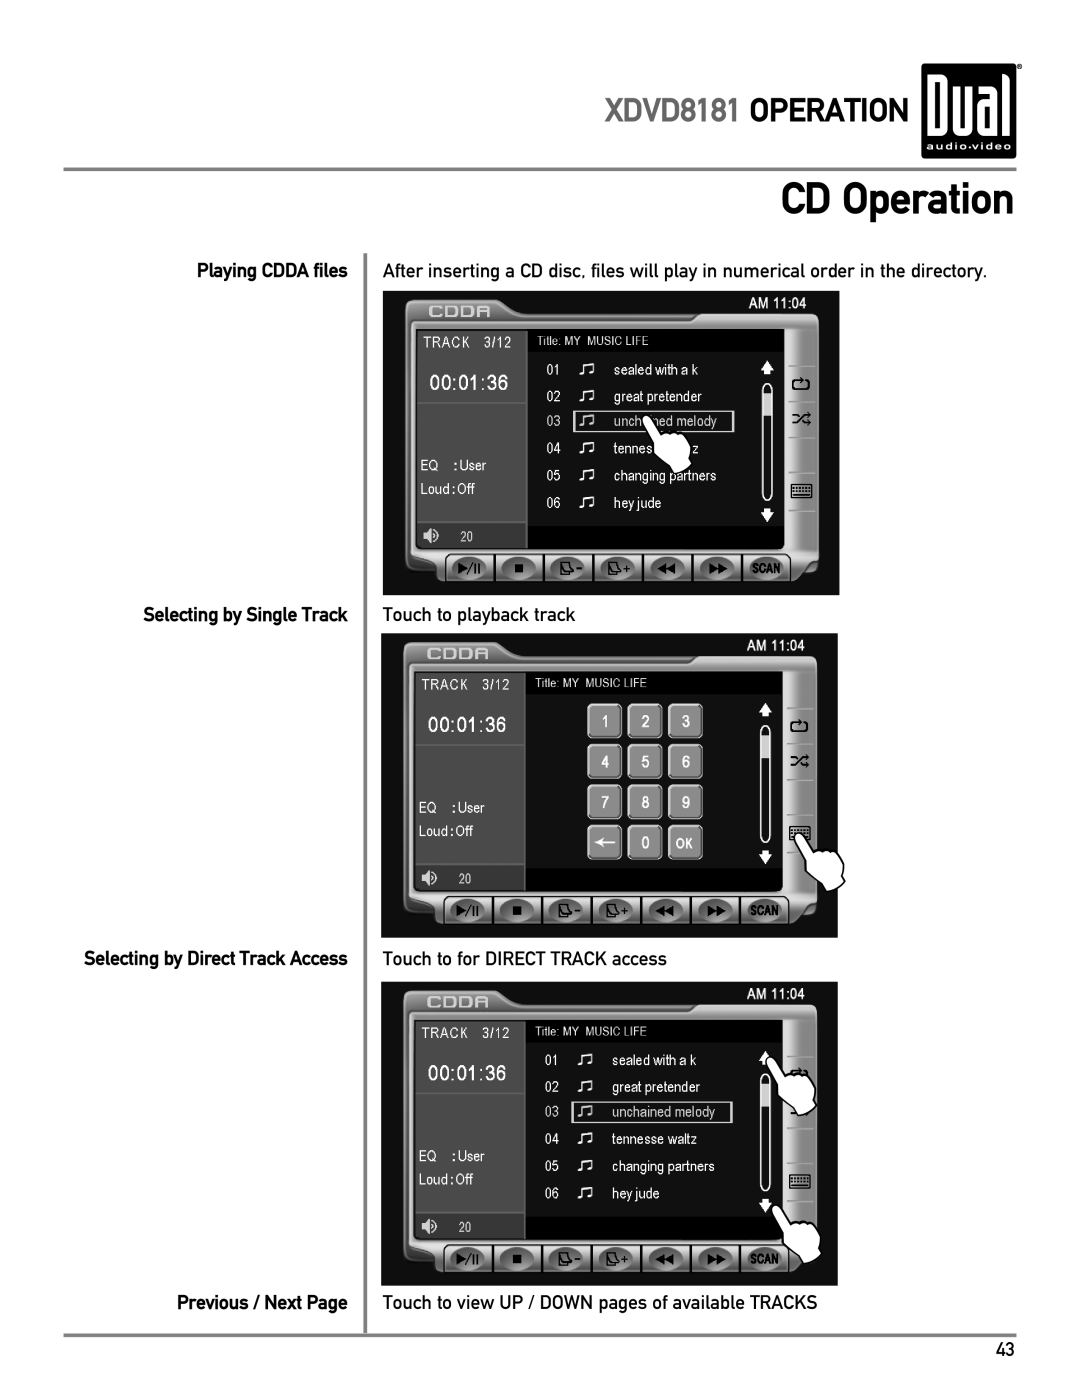 Dual owner manual CD Operation, XDVD8181 OPERATION, Playing CDDA files Selecting by Single Track, Previous / Next Page 